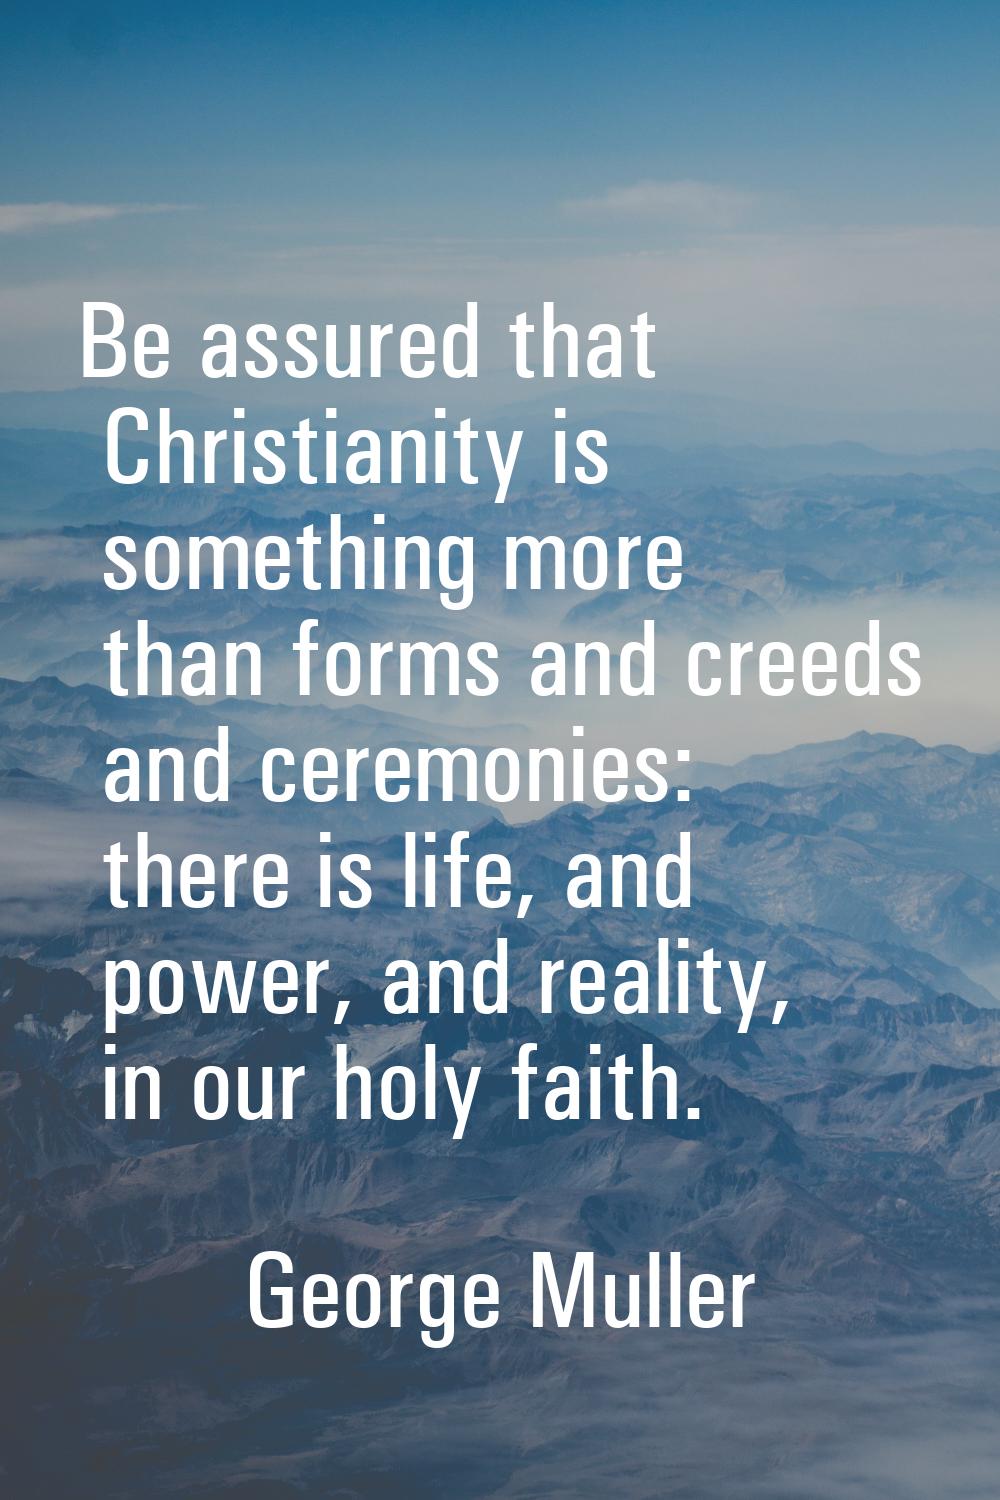 Be assured that Christianity is something more than forms and creeds and ceremonies: there is life,